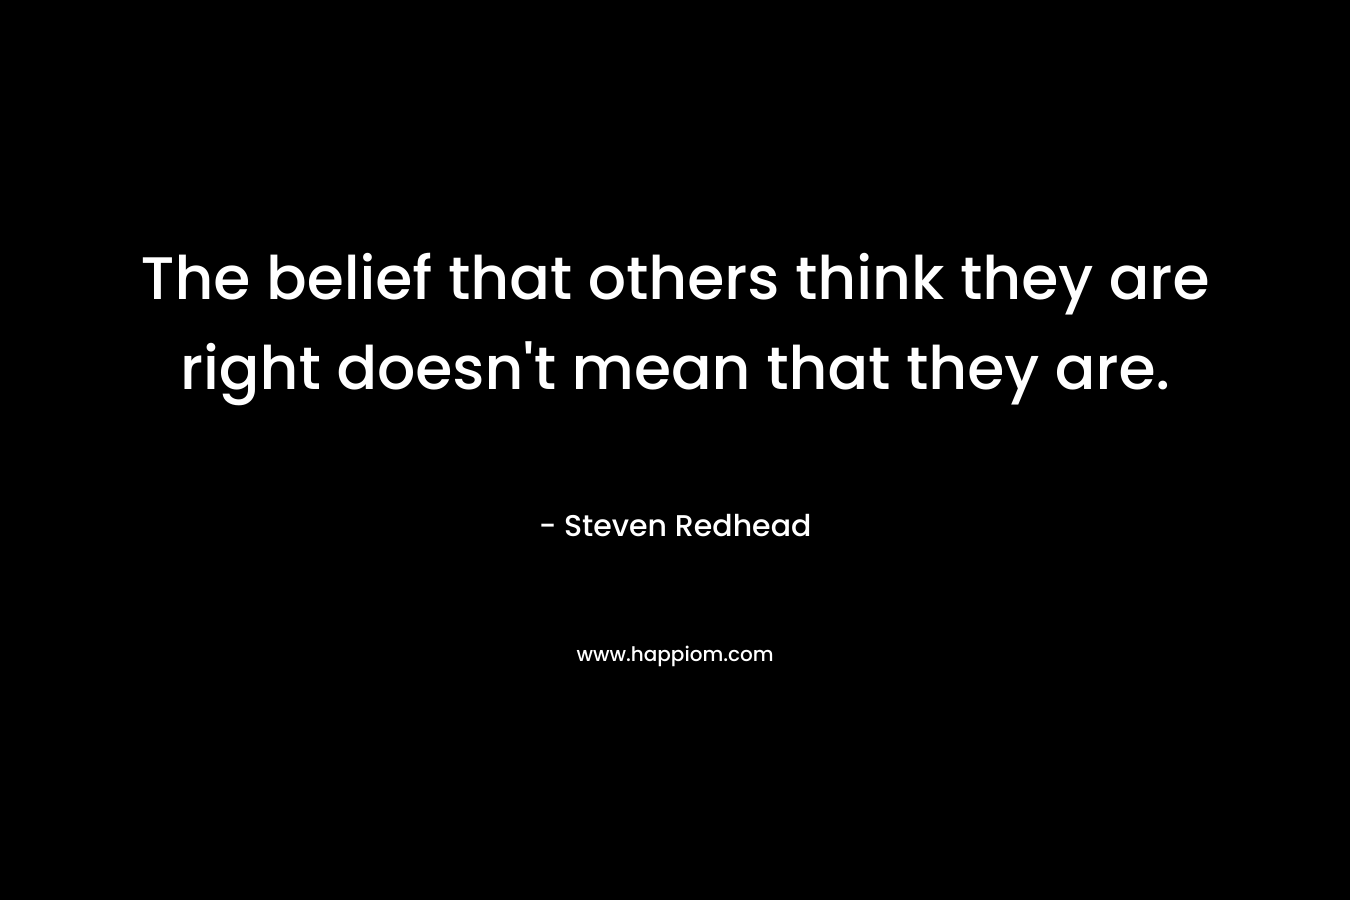 The belief that others think they are right doesn't mean that they are.